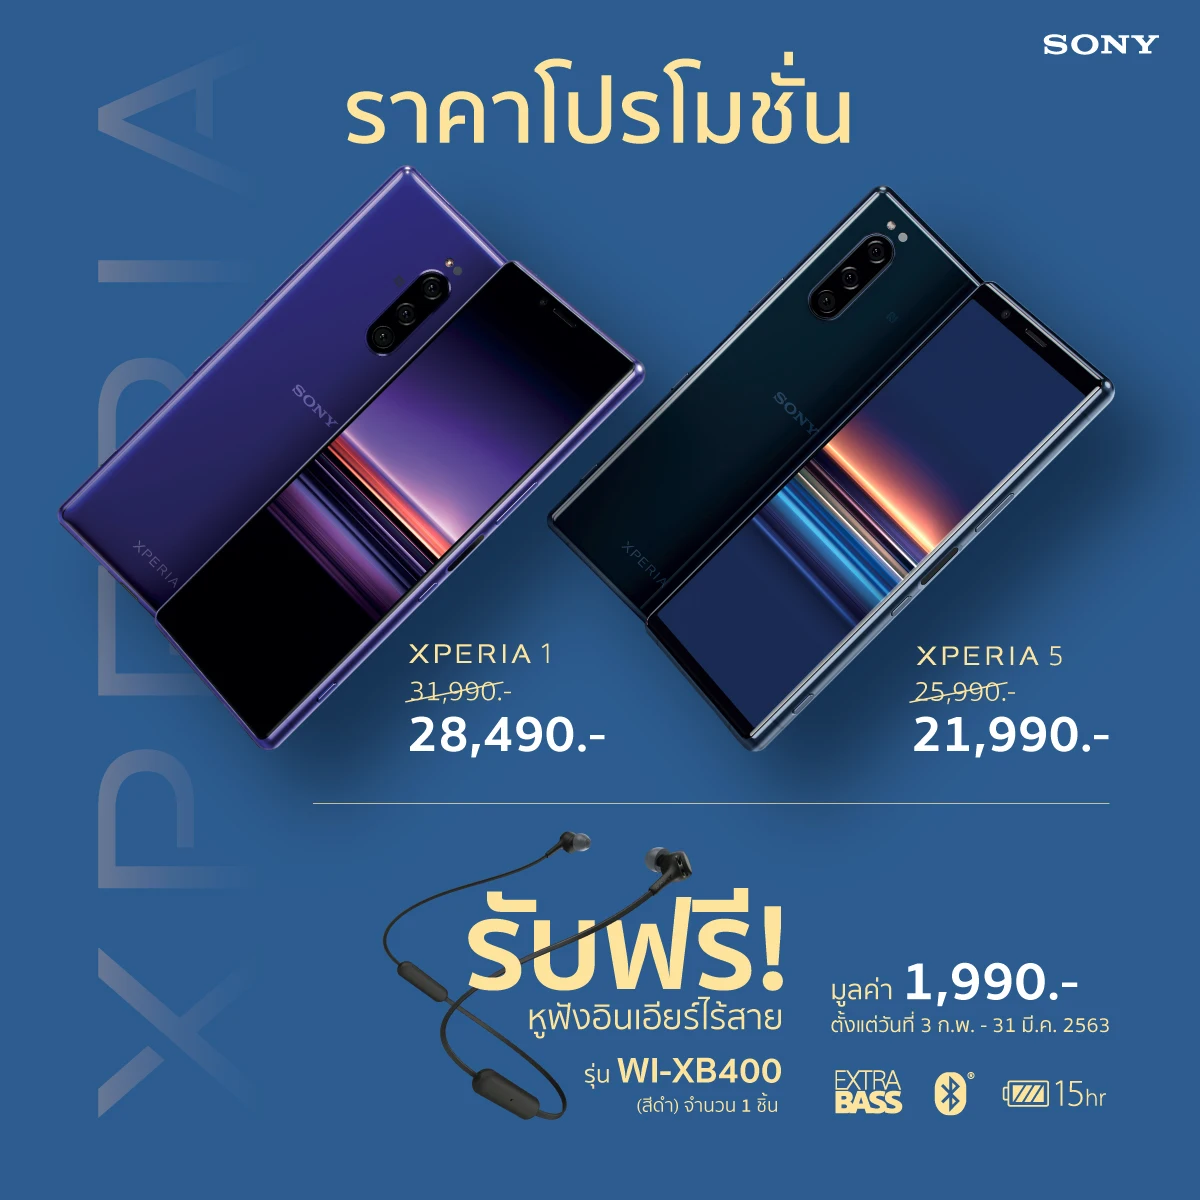 Sony Xperia Promotion